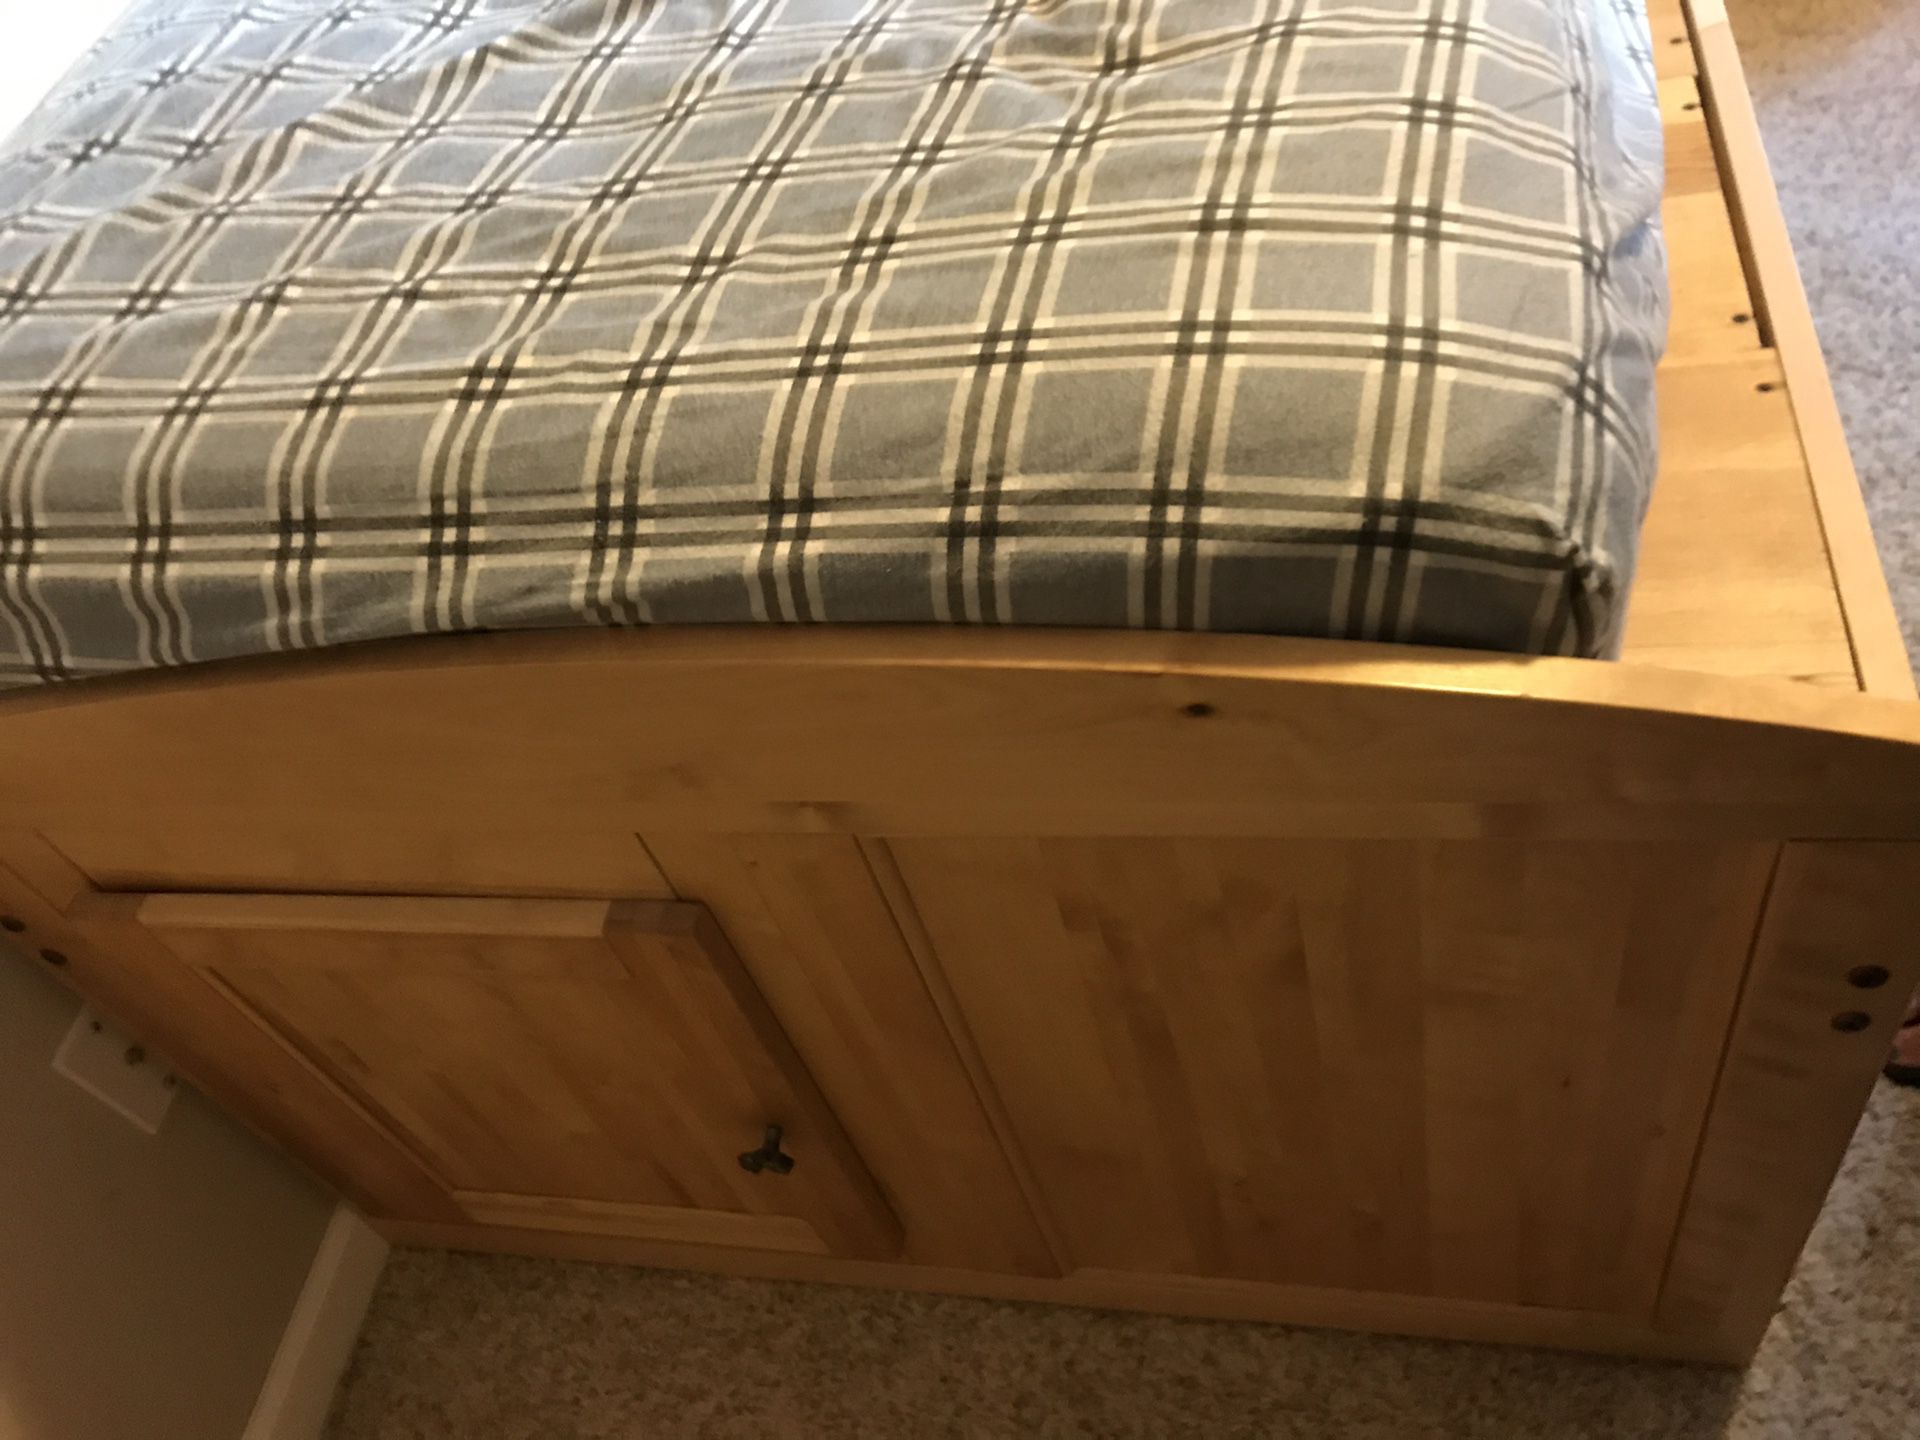 Boys’ Captains Bed - tons of storage